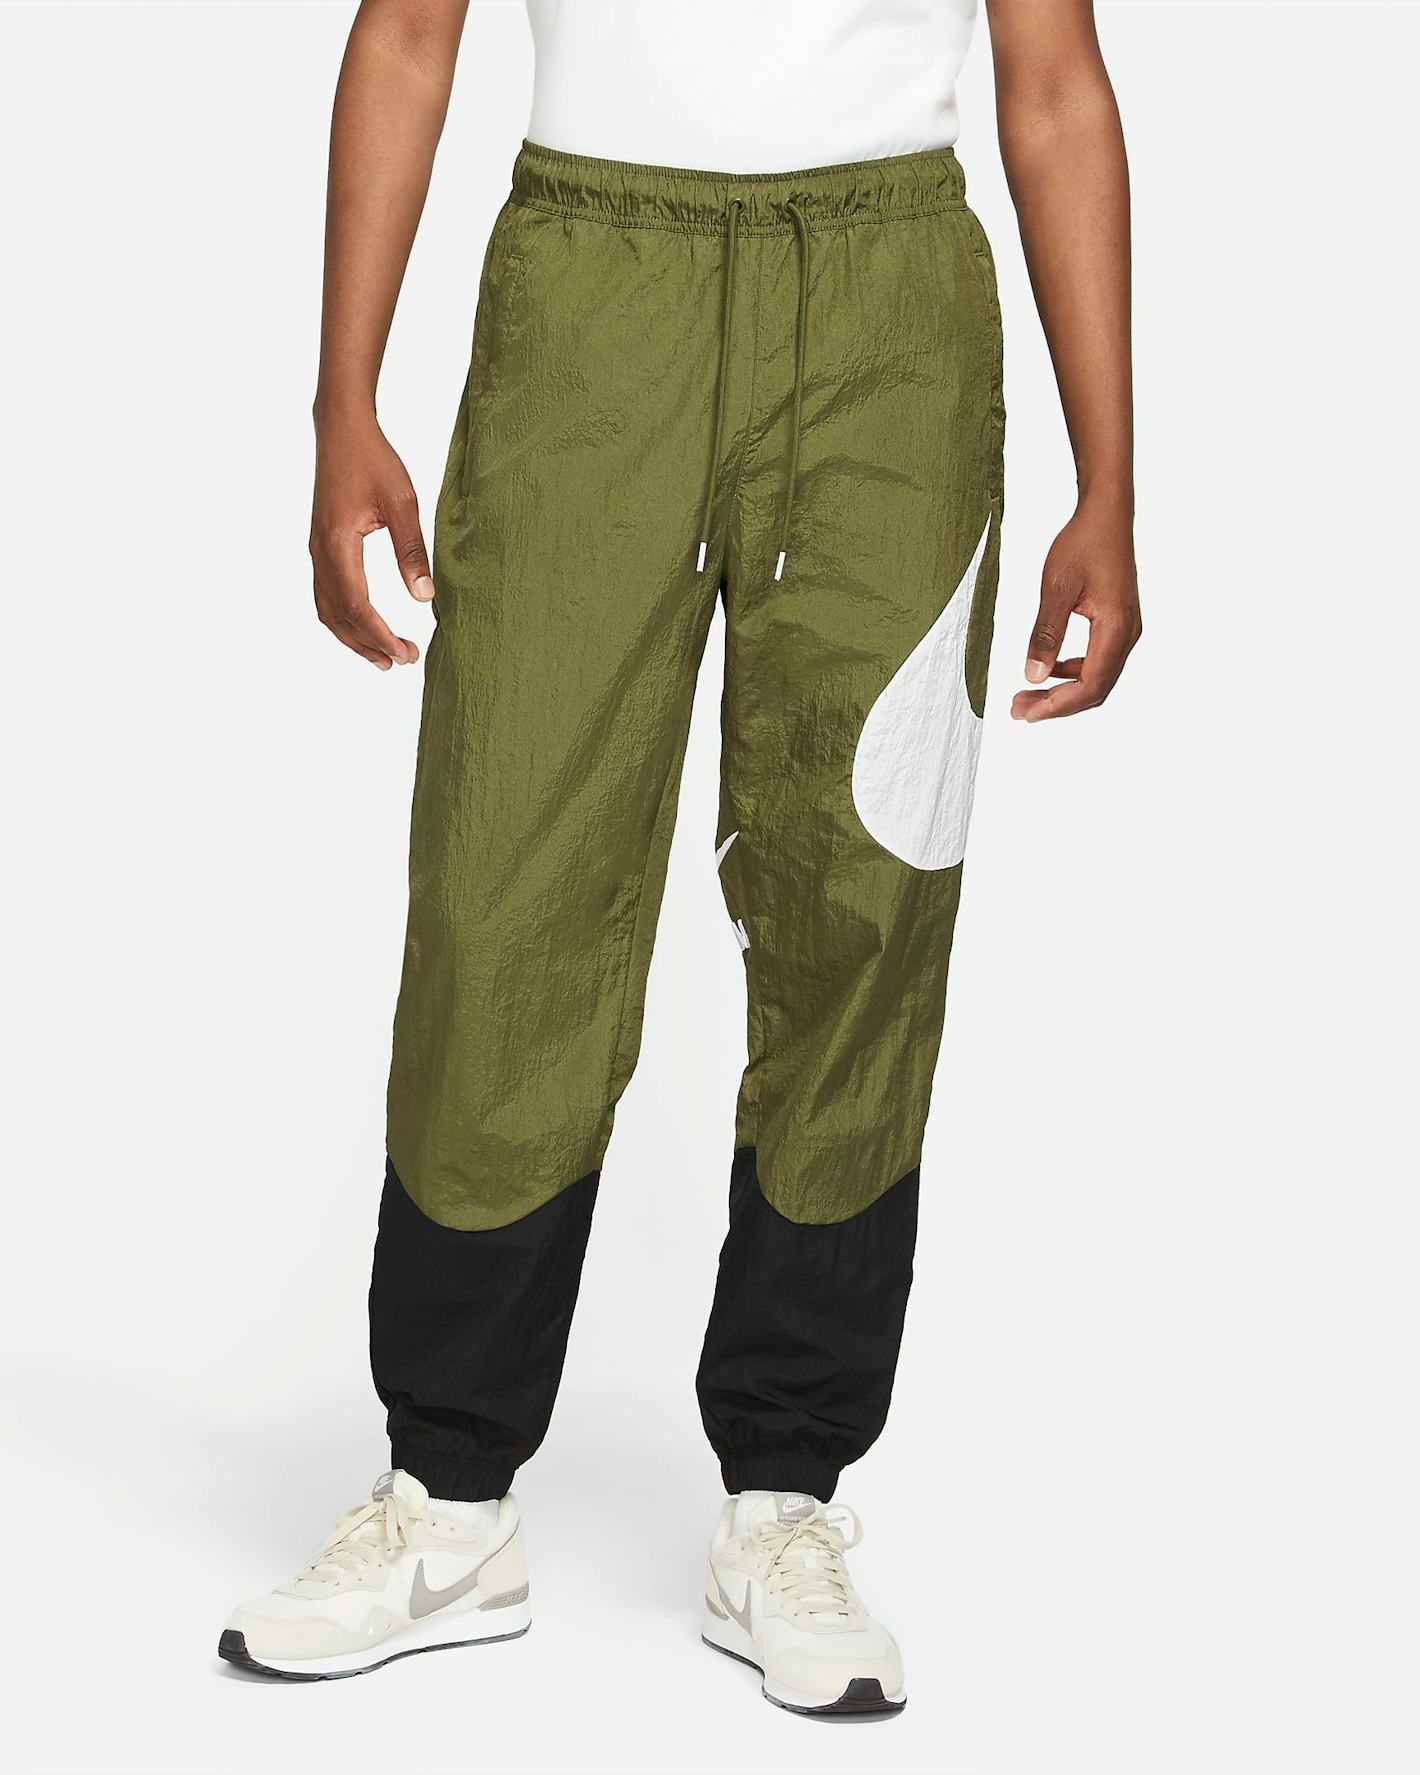 The absolute best track pants you can wear after summer is over